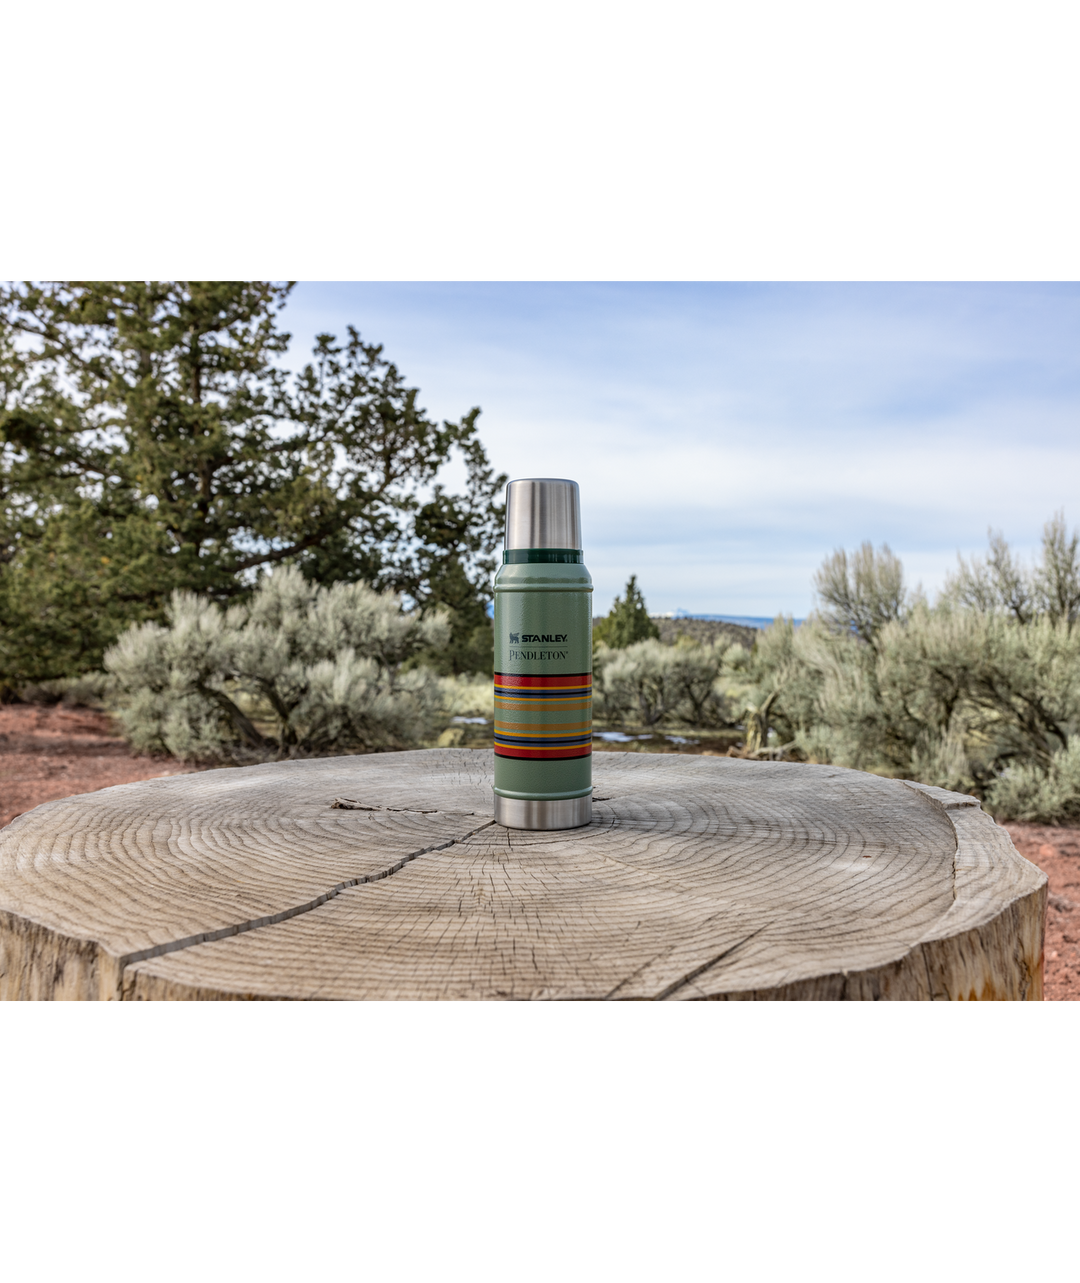 14 oz. store berlin - STANLEY X PENDLETON Stanley's classic vacuum bottle  adorned with stripes from Pendleton's top selling Yakima Stripe Blanket.  Built to last, this sturdy bottle has double-wall insulation to